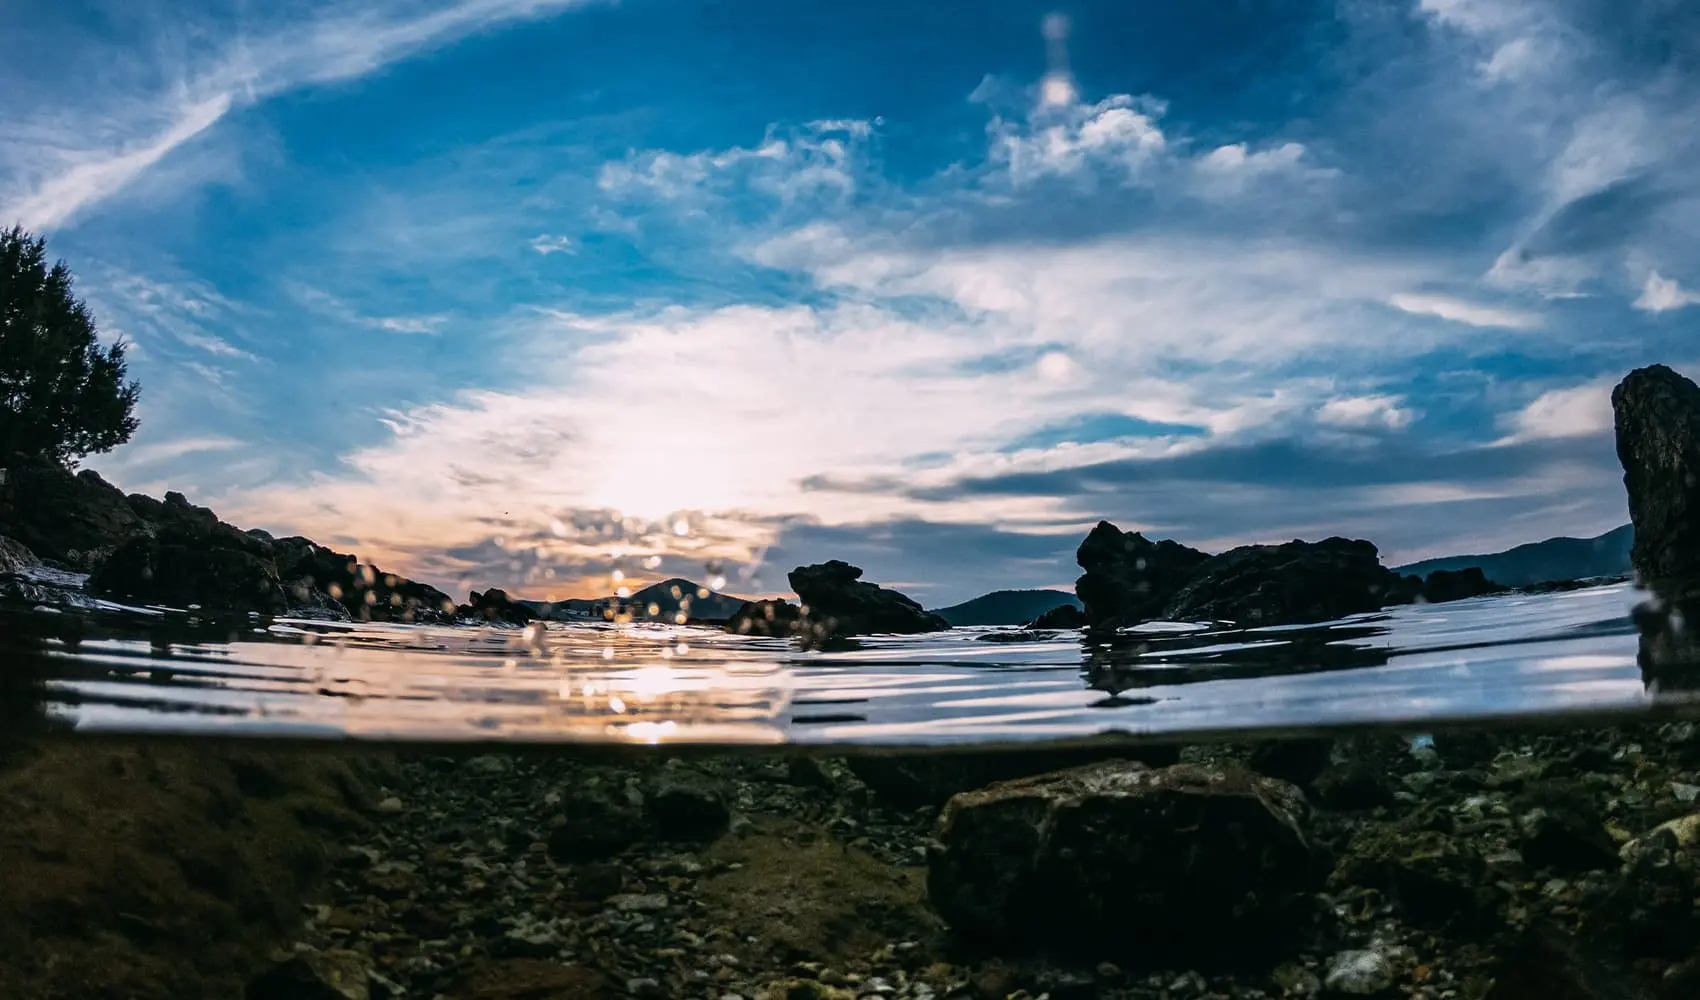 Split view of a rocky coastline and cloudy sunset from the water's surface.